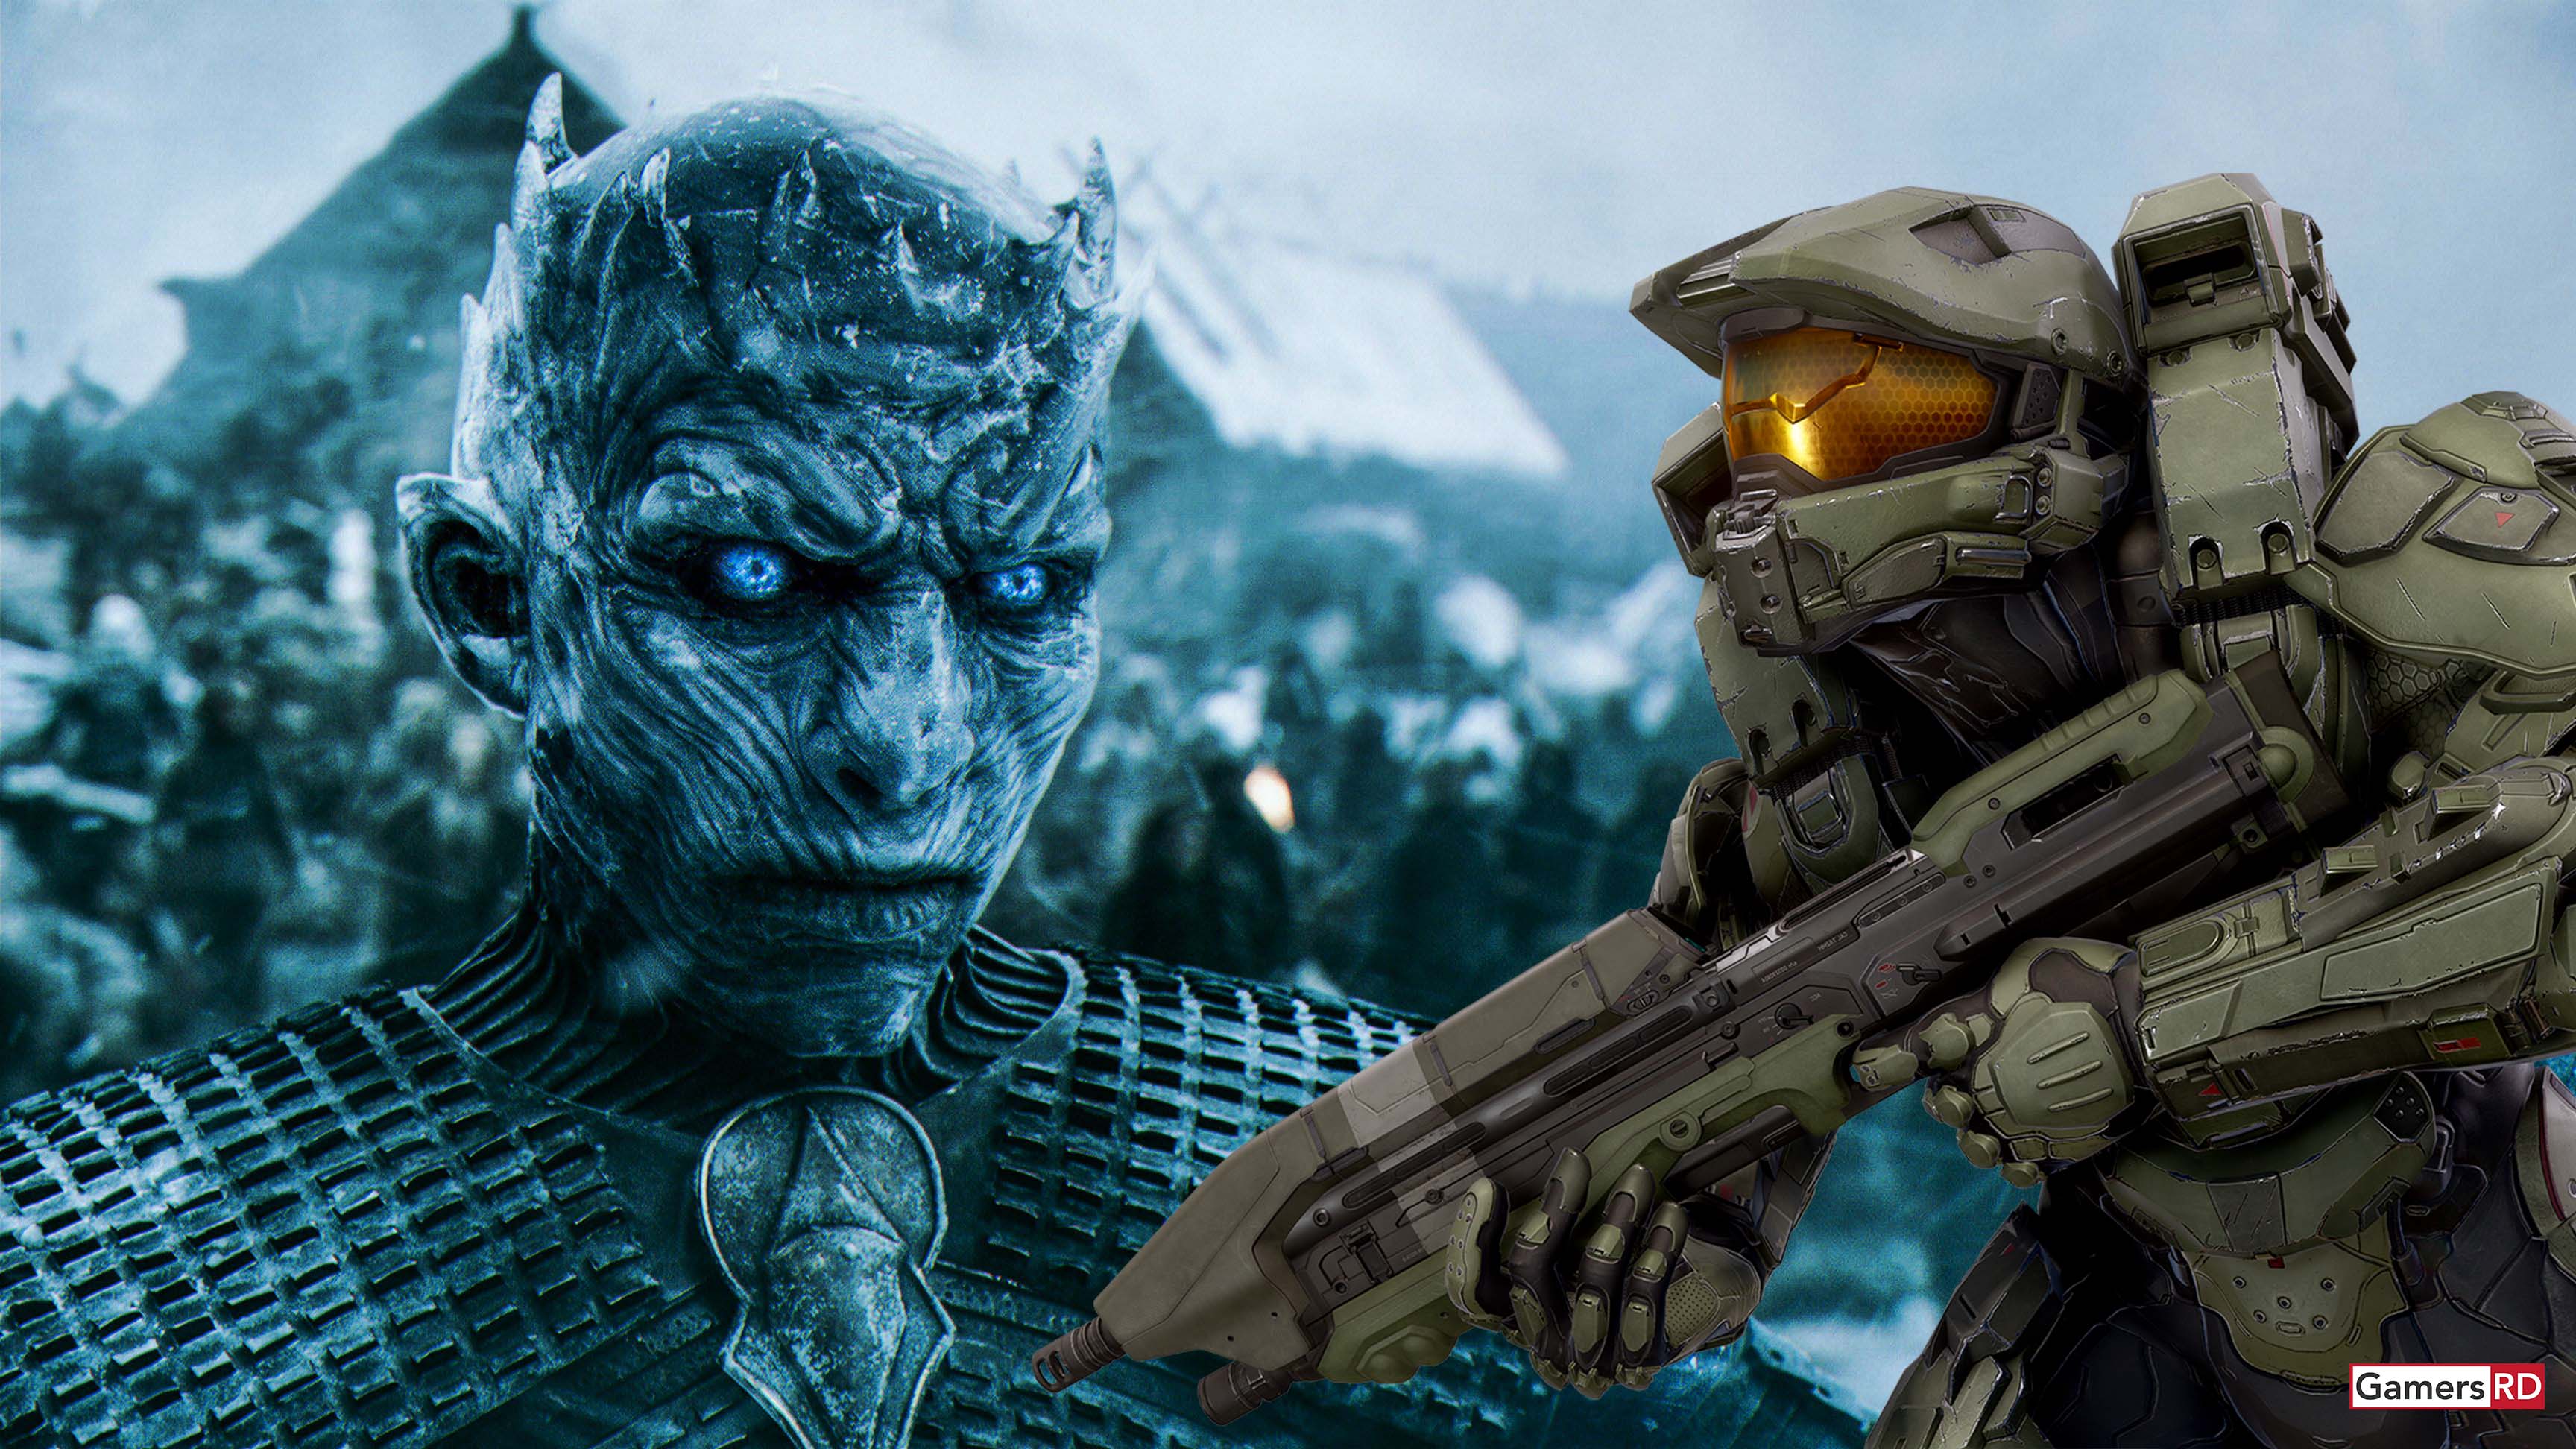 Halo Tv, Game of Thrones, Showtime, GamersRD